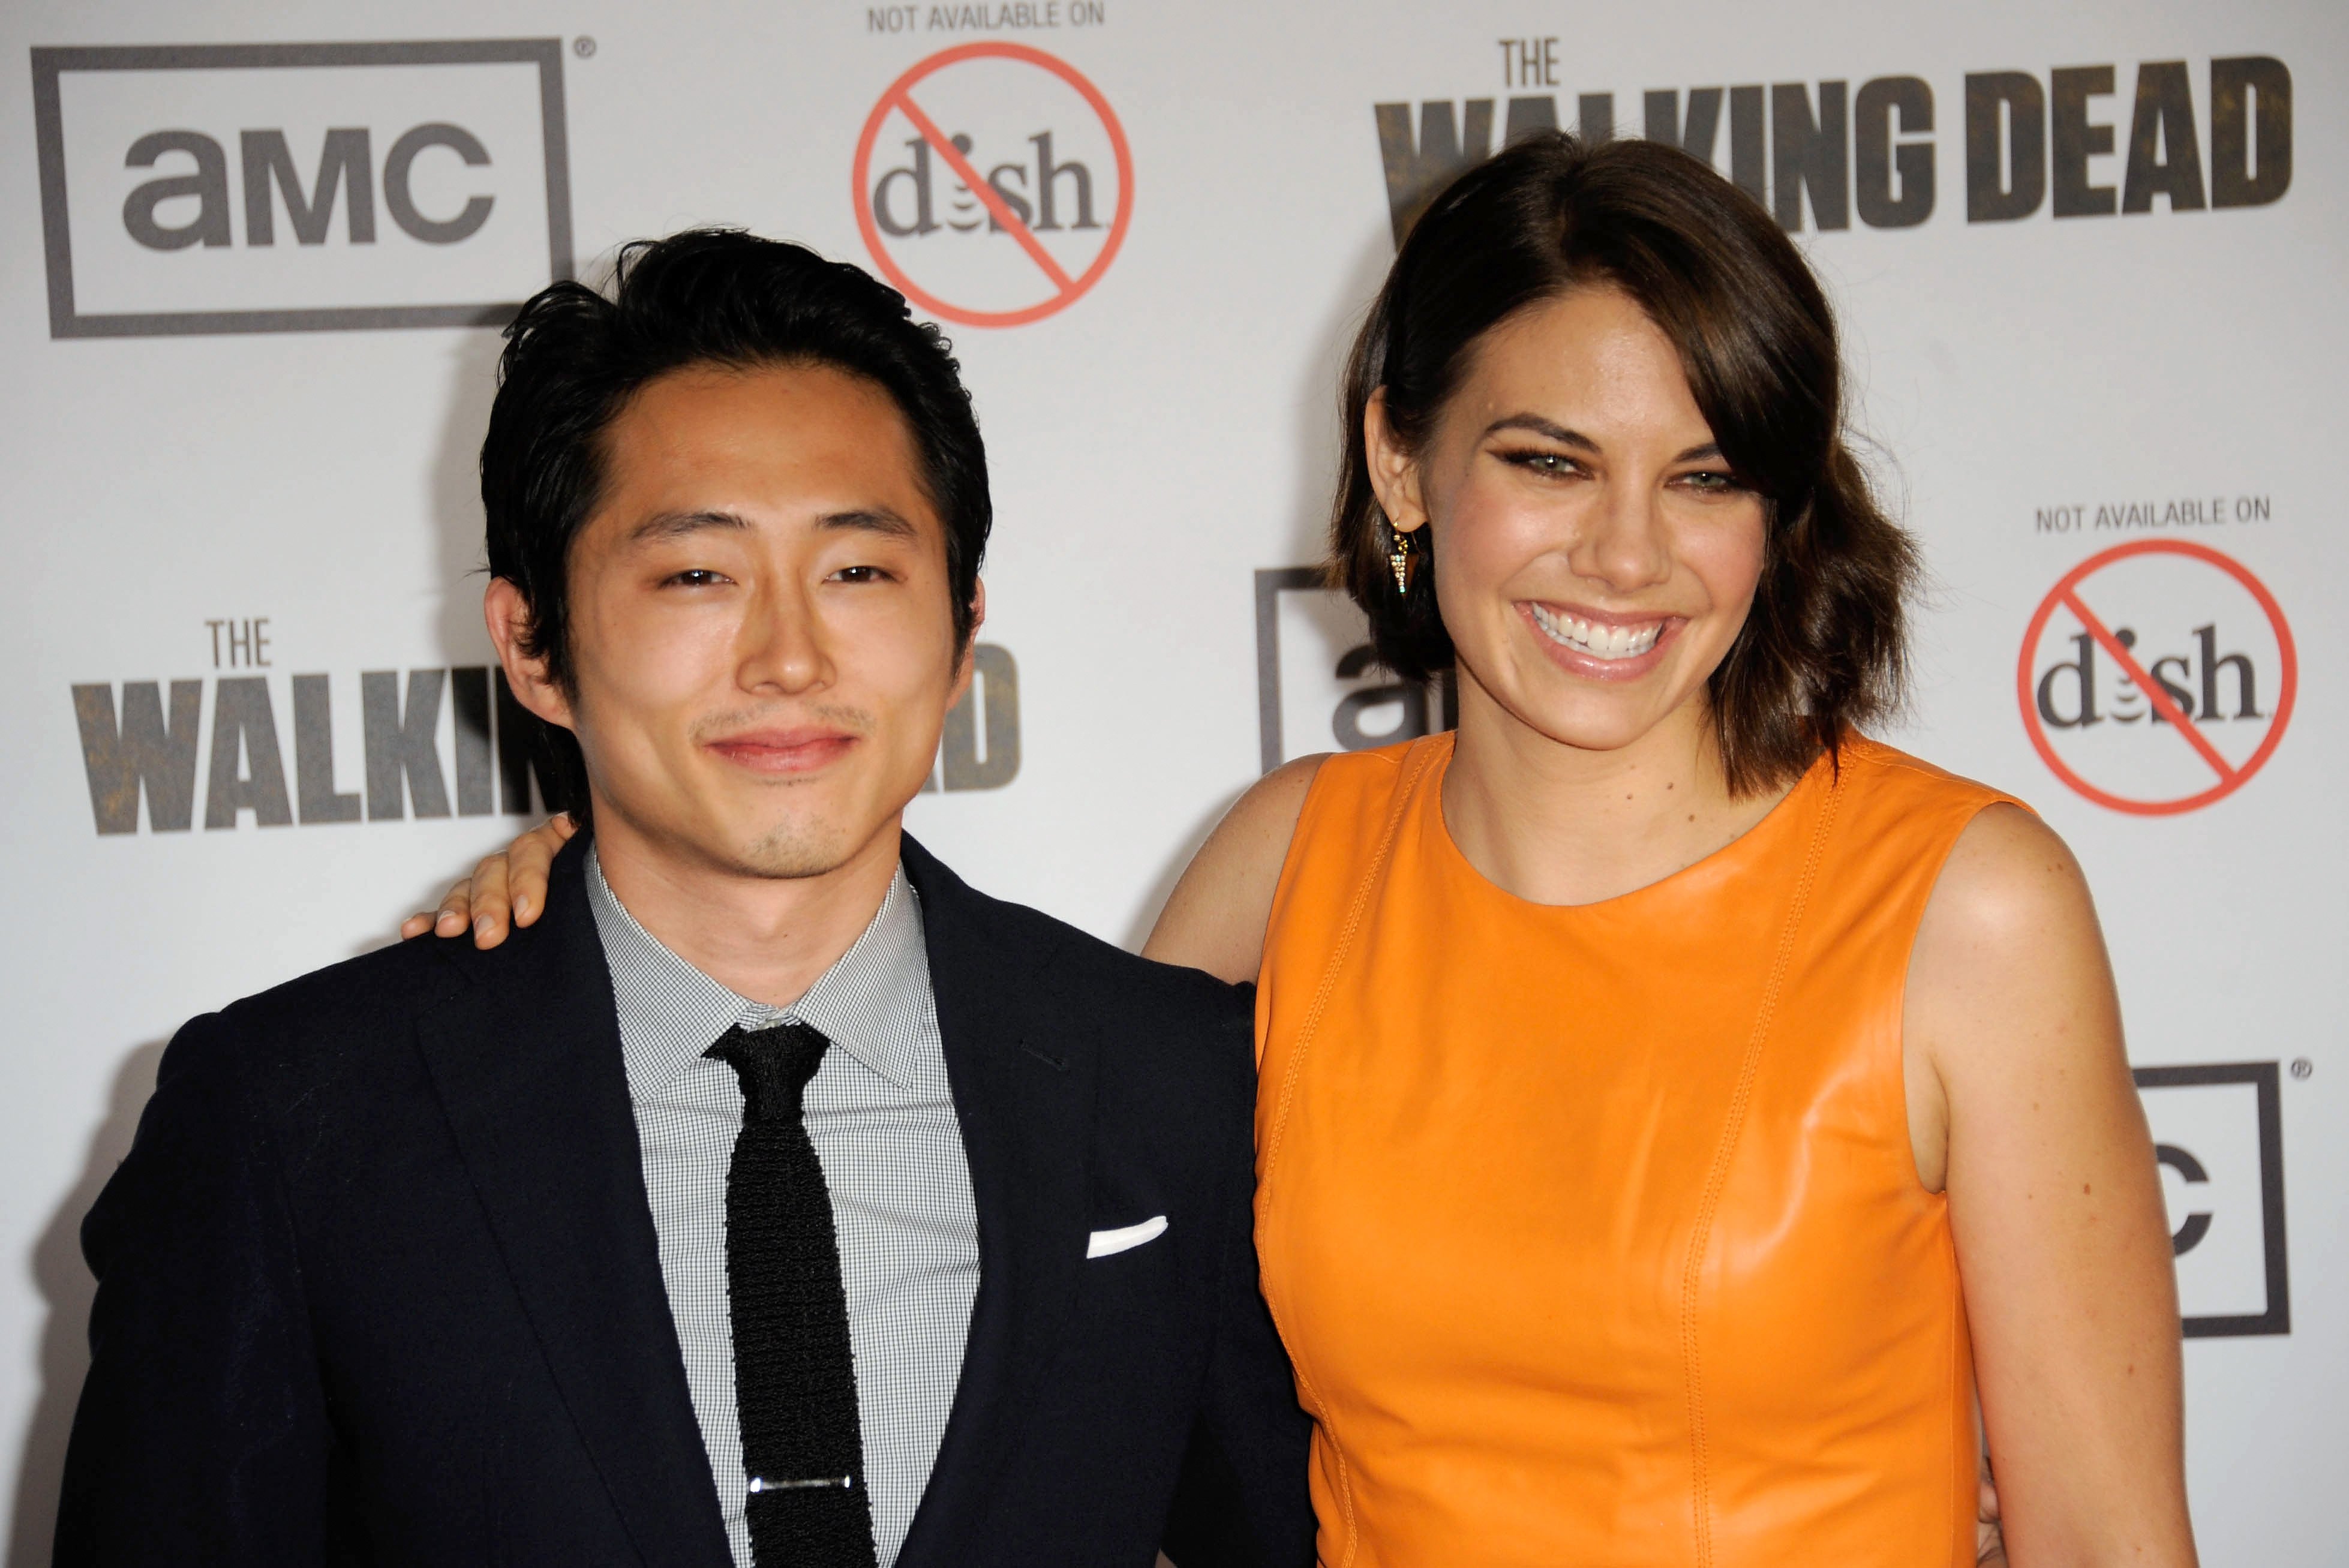 Steven Yuen and Lauren Cohan at AMC's "The Walking Dead" season 3 premiere at AMC Universal Citywalk Stadium 19 on October 4, 2012, in Universal City, California. | Source: Getty Images